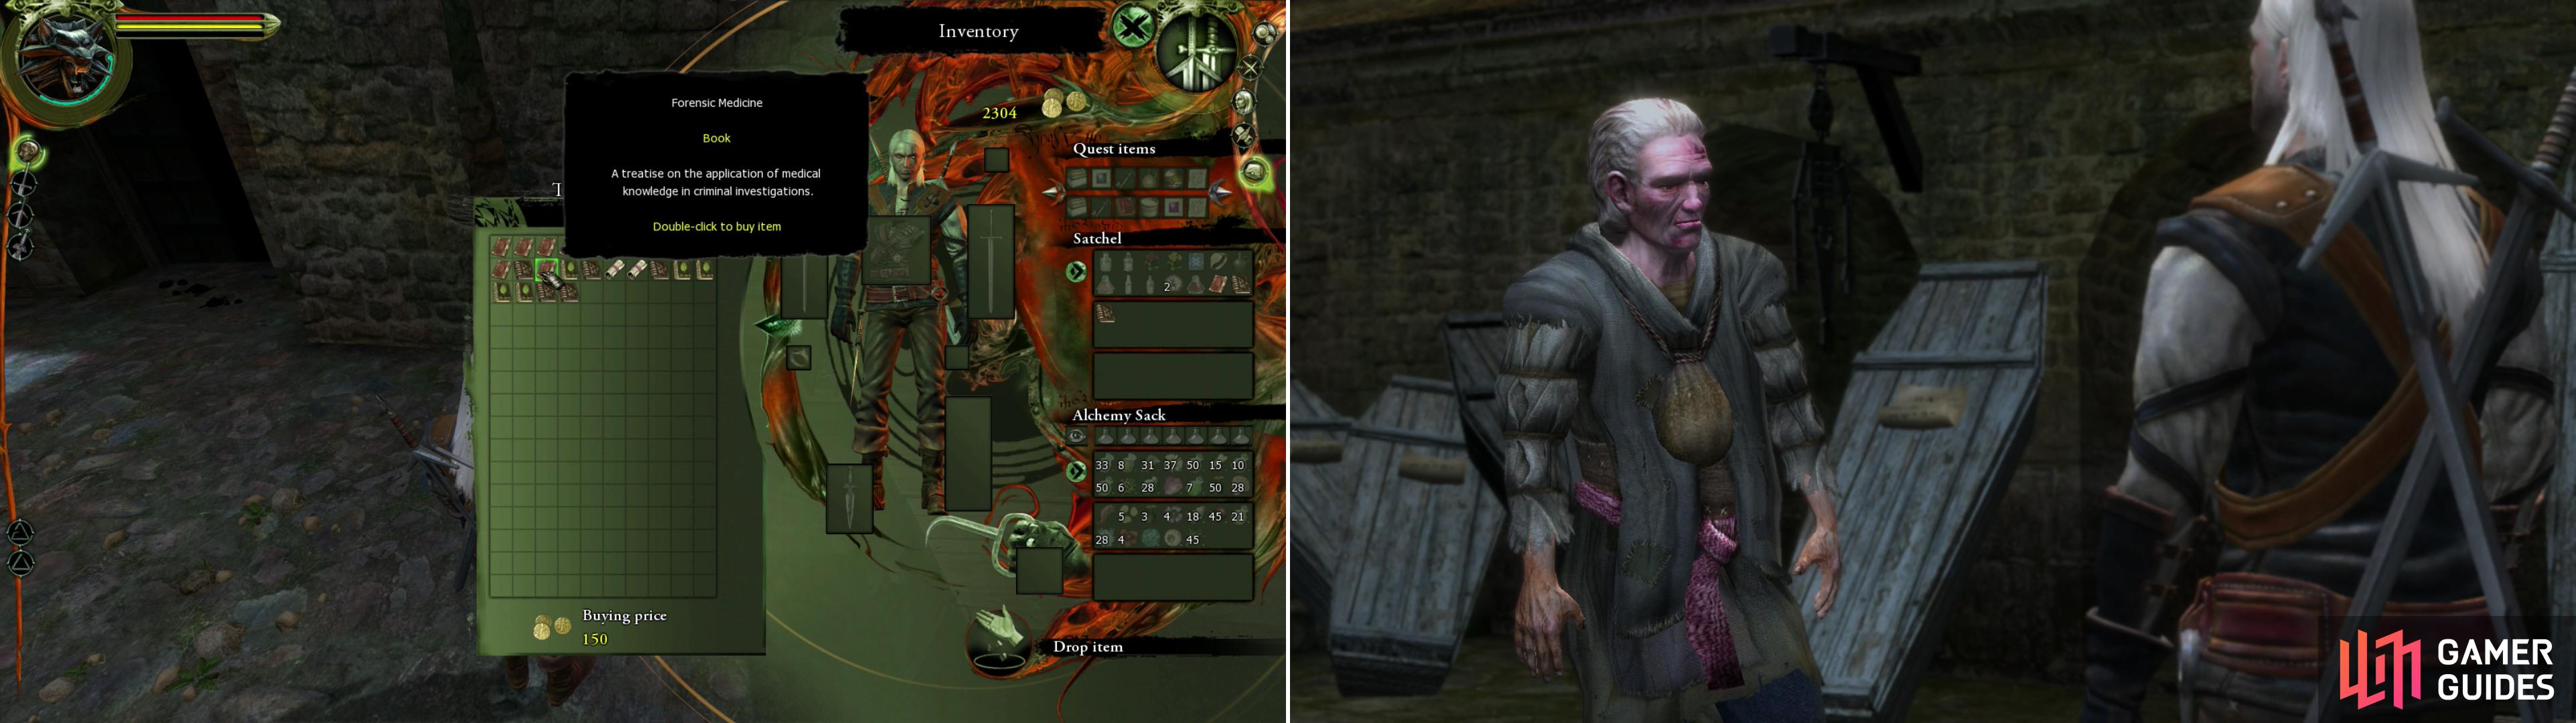 Knowledge is power-buying books from the Antiquarian will allow you to draw the correct conclusions during your autopsy (left). To gain access to the Cemetery-and the dead Salamander’s body-you’ll need to bribe the Gravedigger with dwarven spirits and either get his debts canceled or go over his head (right).